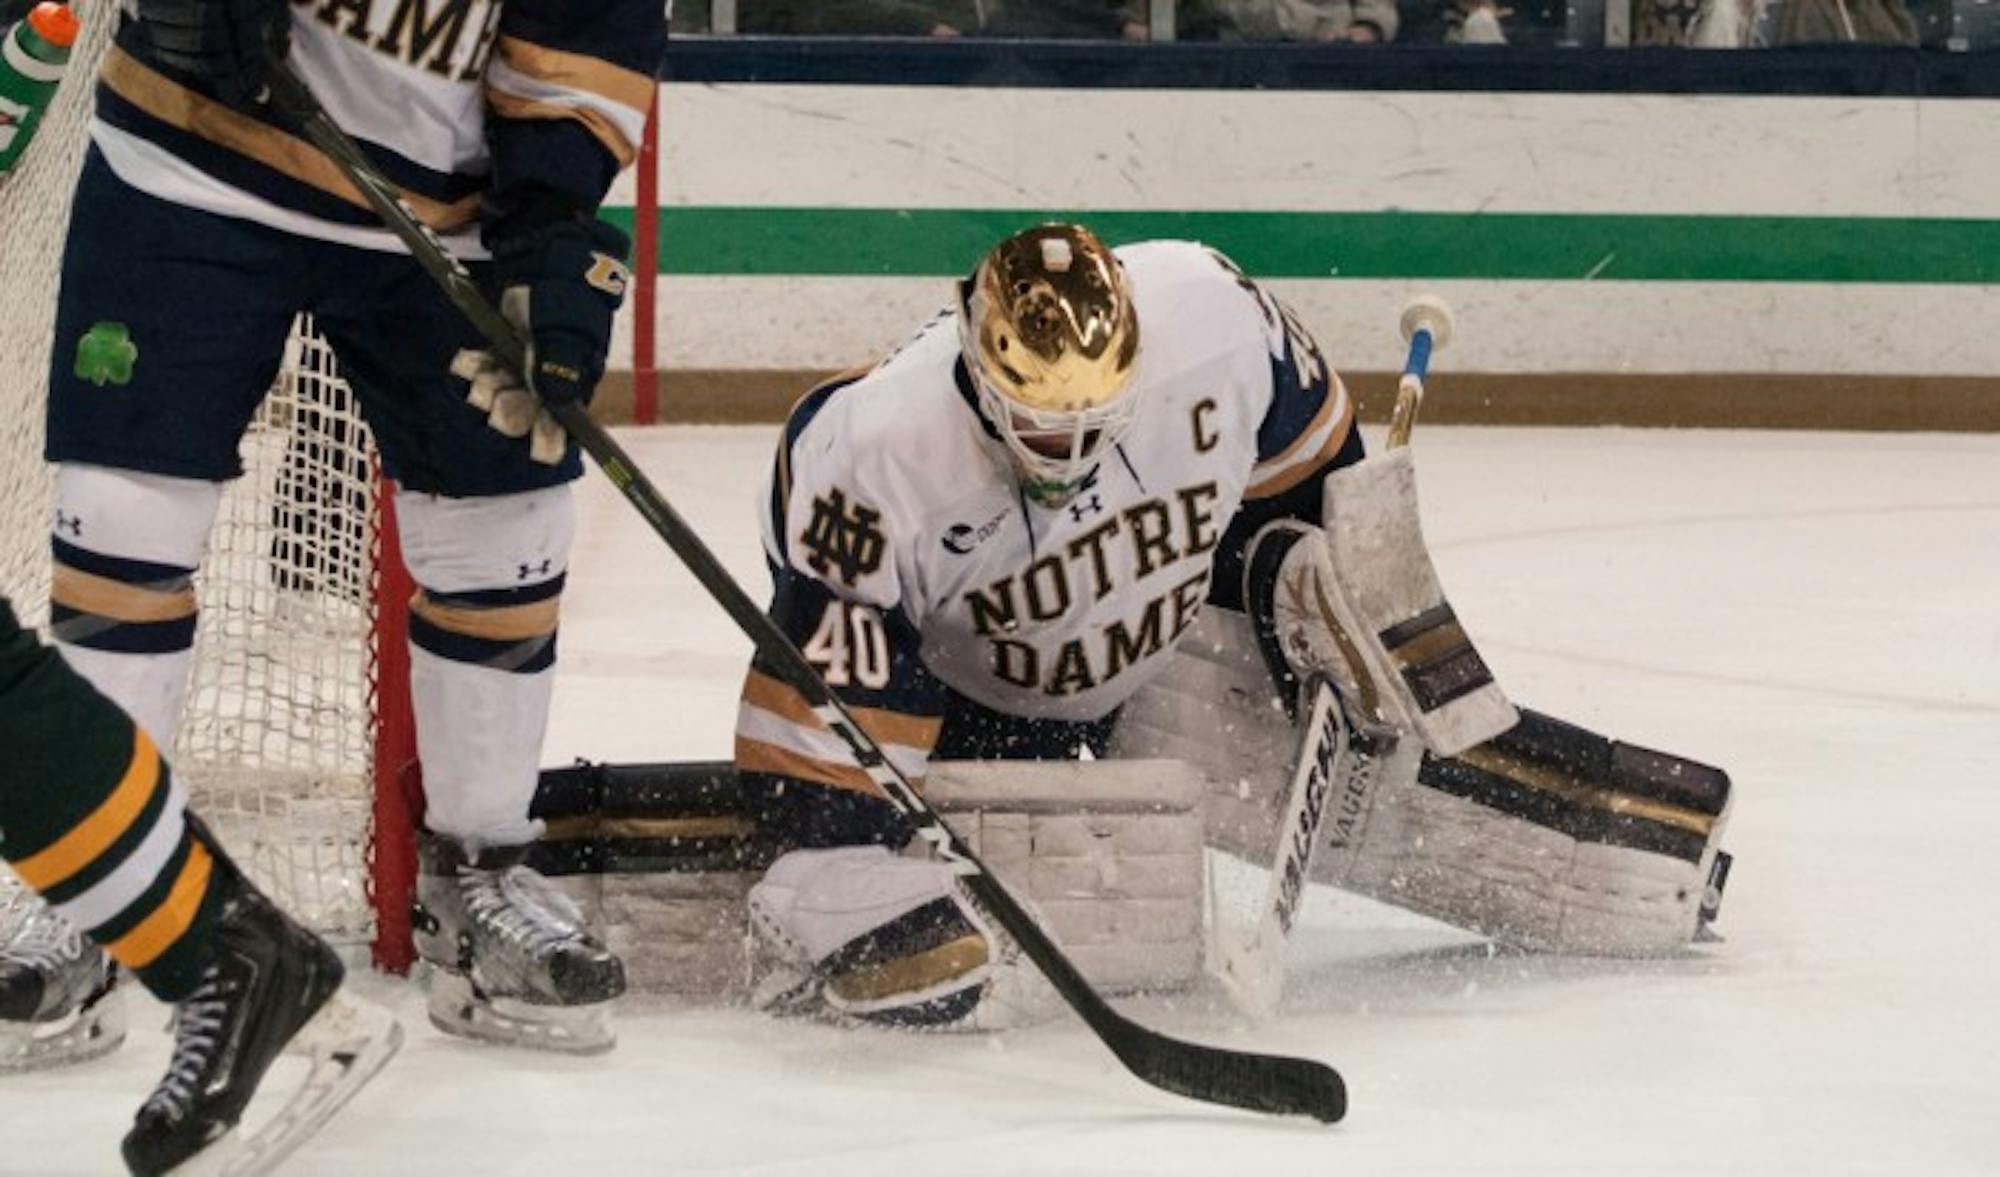 Irish junior goalkeeper makes a save during Notre Dame's 4-1 victory against Vermont on Feb. 4 at Compton Family Ice Arena.